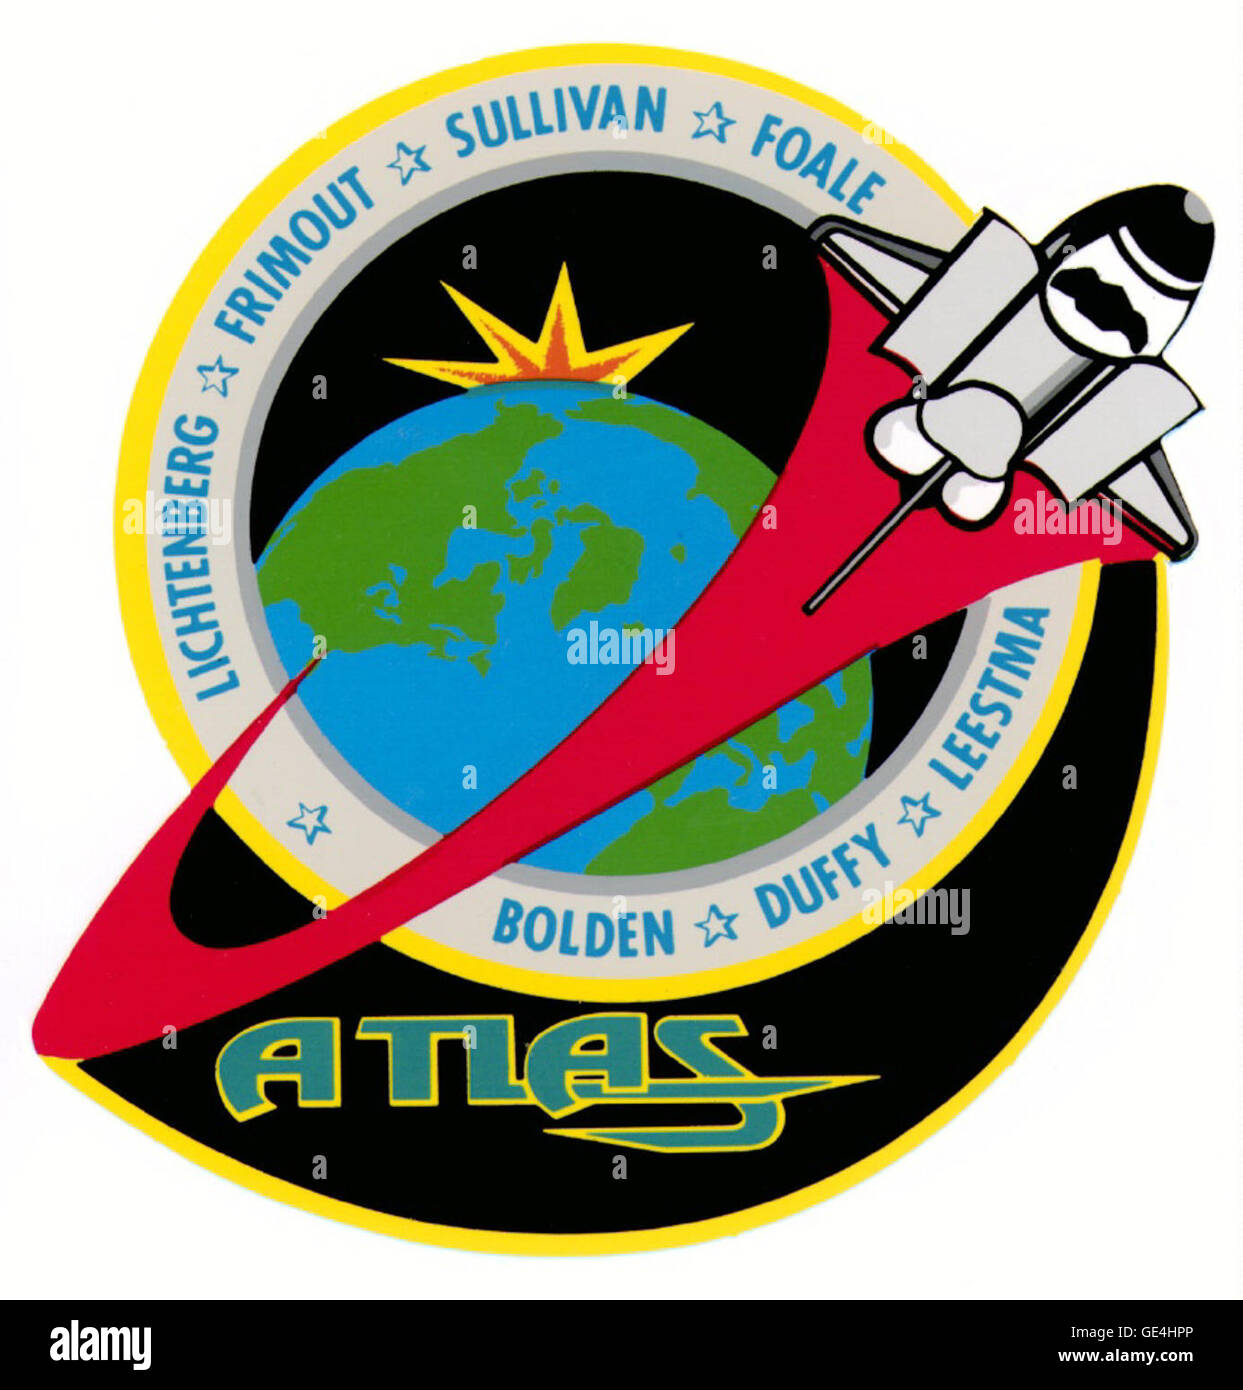 Launch: March 24, 1992  Landing: April 2, 1992 Kennedy Space Center, Fl. Astronauts: Charles F. Bolden Jr., Brian Duffy, Kathryn D. Sullivan, David C. Leestma, C. Michael Foale, Byron K. Lichtenberg and Dirk D. Frimout Space Shuttle: Atlantis The mission carried the first Atmospheric Laboratory for Applications and Science (ATLAS-1) on Spacelab pallets mounted in the orbiter's cargo bay. The non-deployable payload, equipped with 12 instruments from the U.S., France, Germany, Belgium, Switzerland, the Netherlands and Japan, conducted studies in atmospheric chemistry, solar radiation, space plas Stock Photo